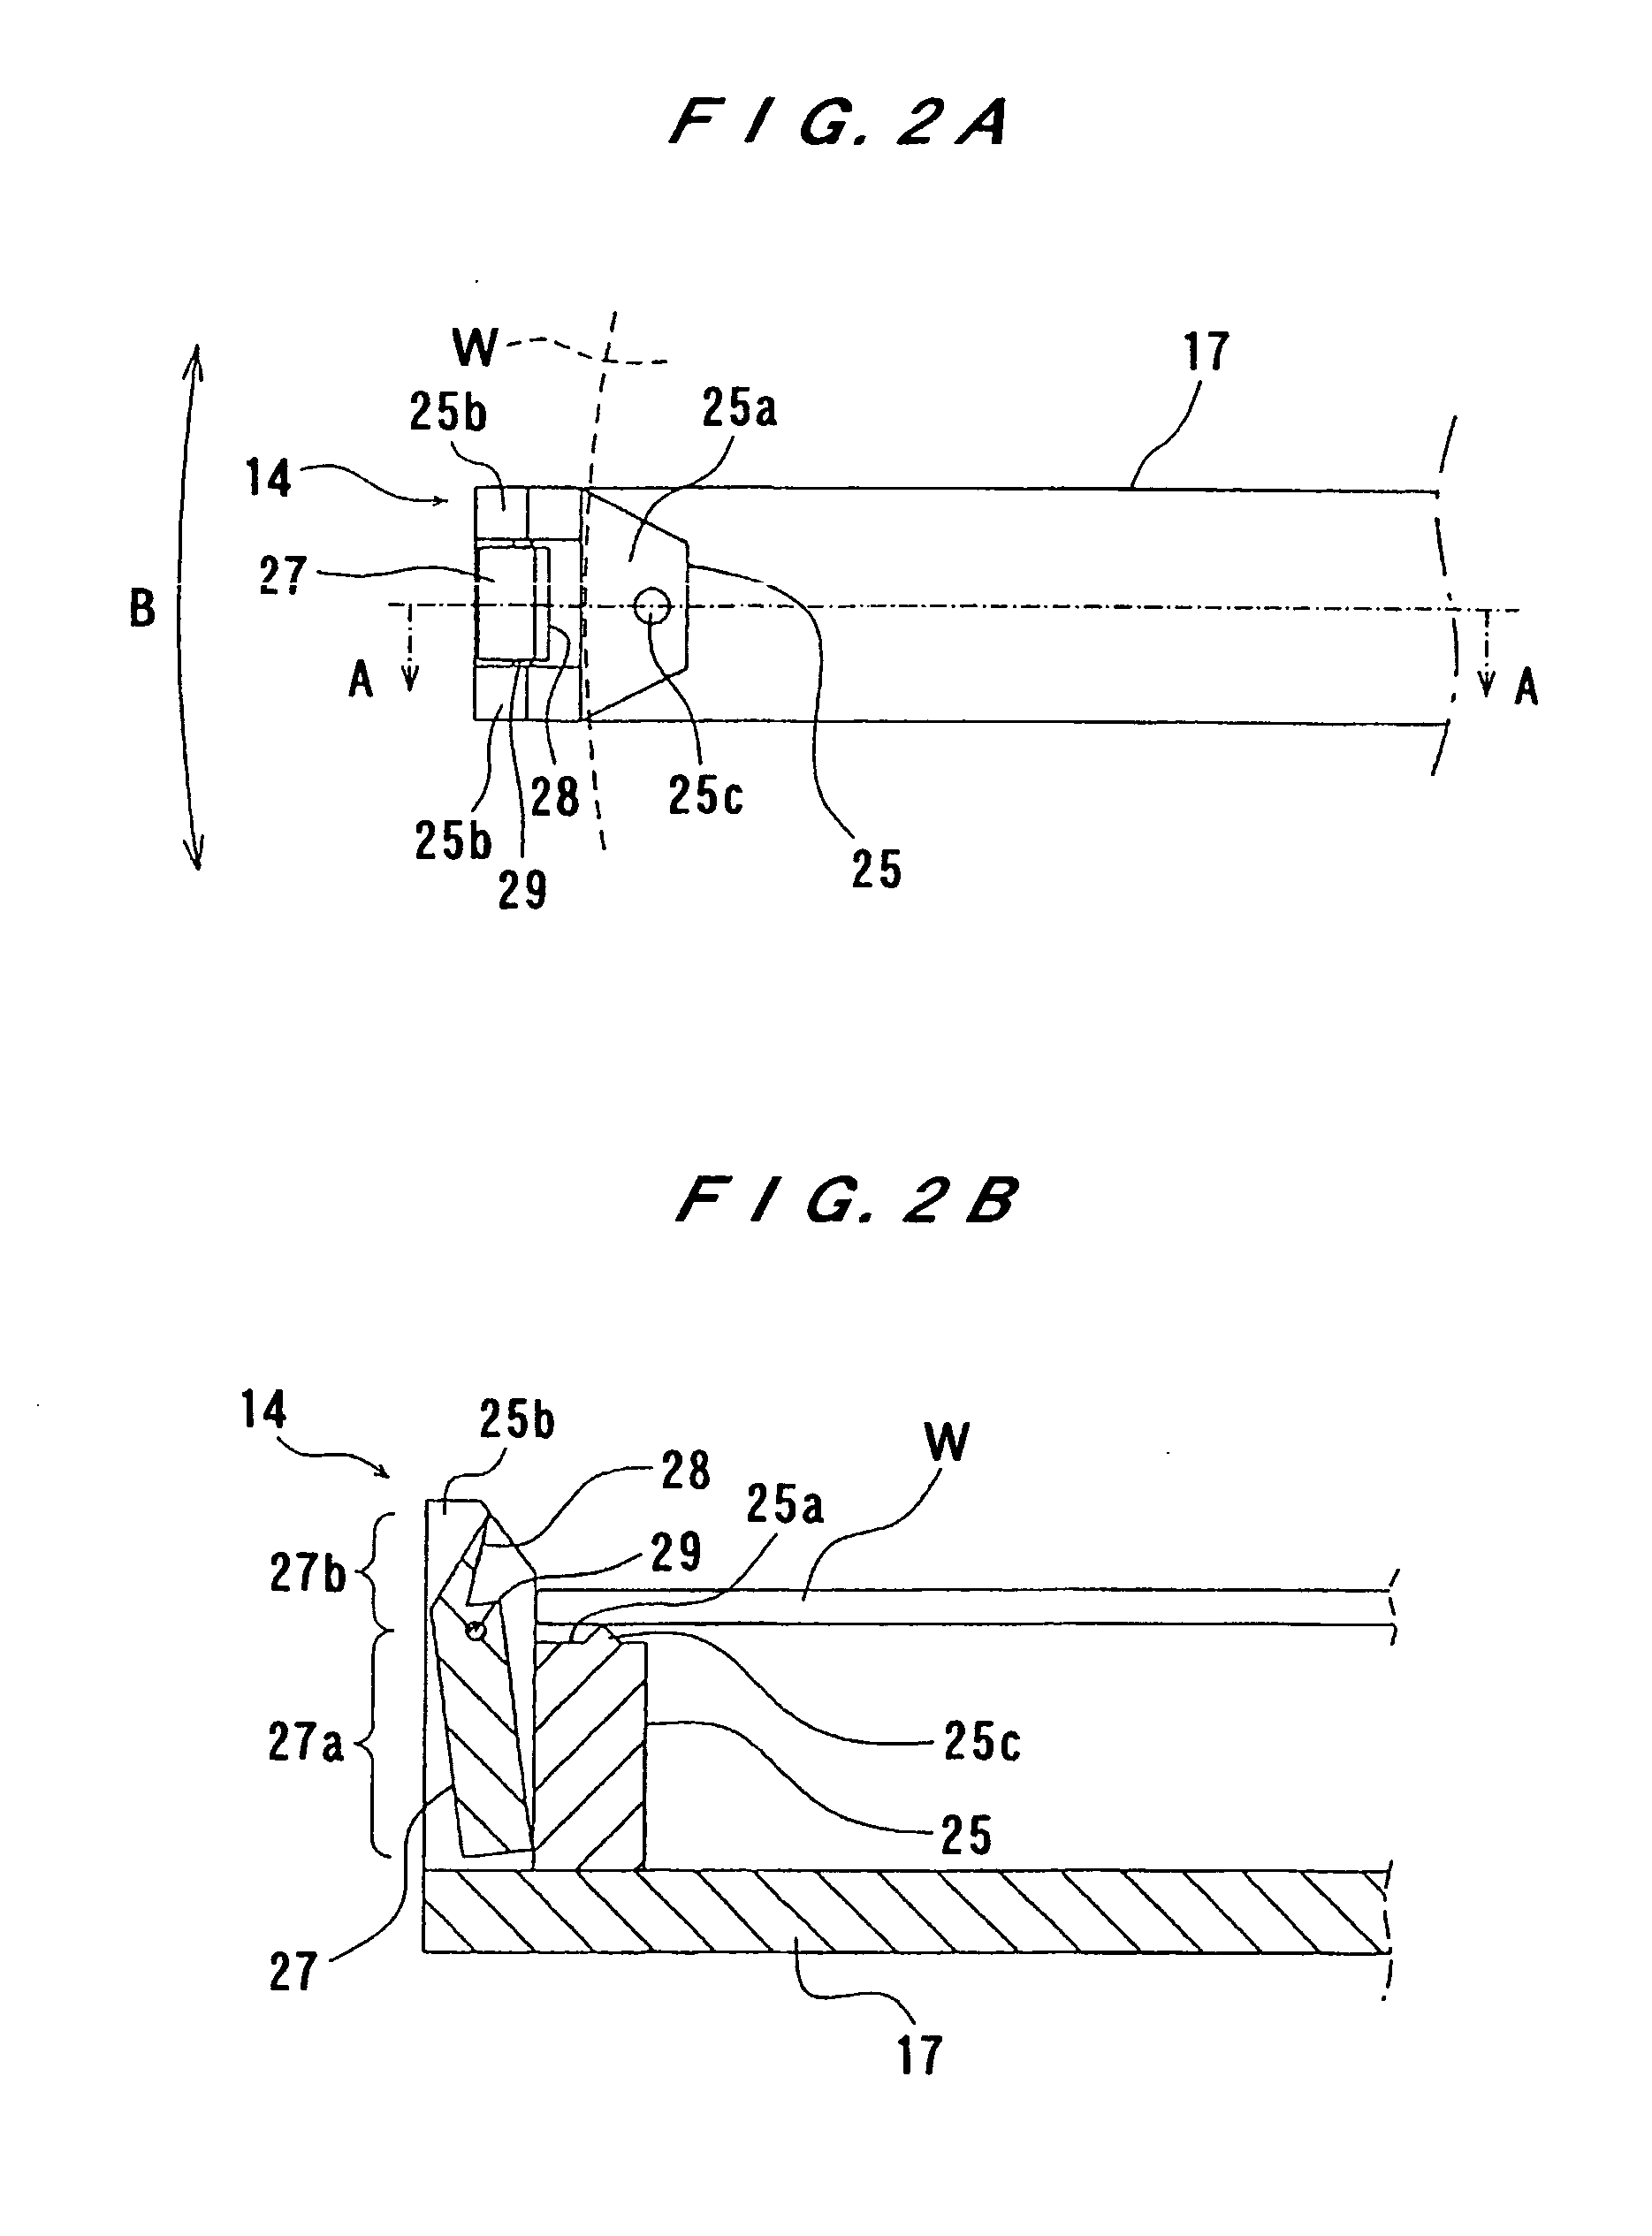 Substrate Processing Apparatus and Method